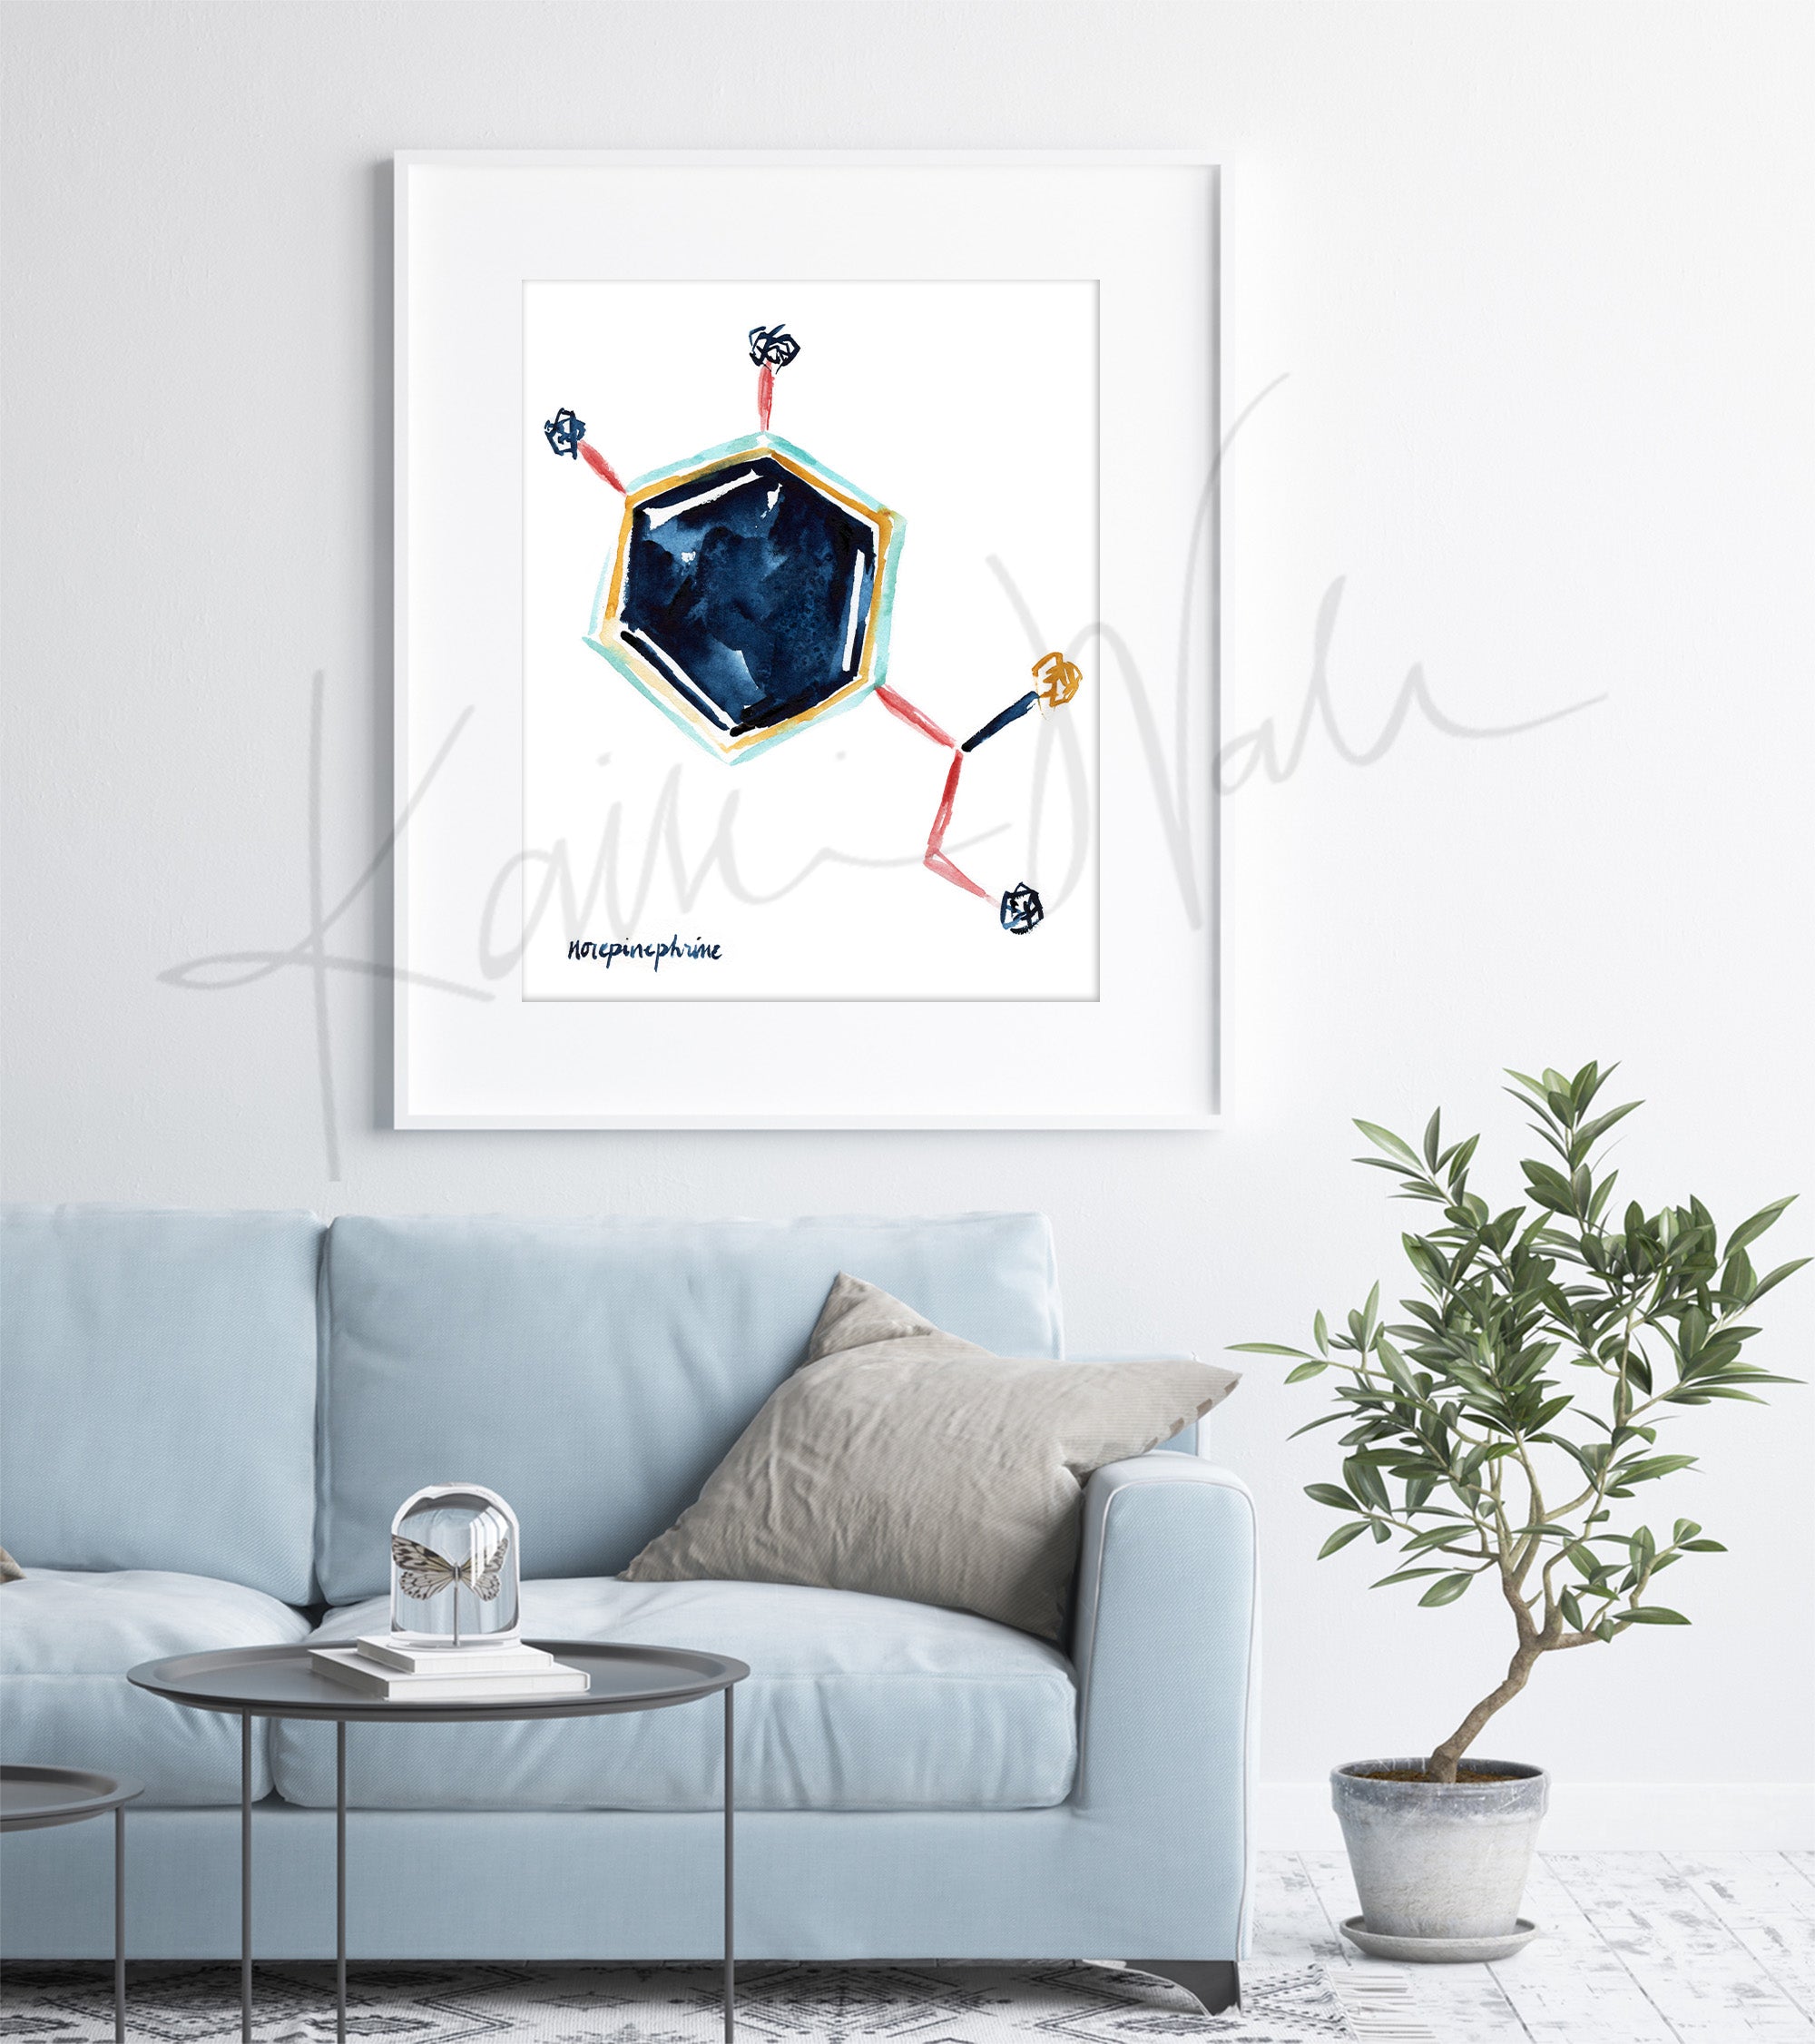 Framed watercolor painting of the norepinephrine hormone structure in blues, yellow and reds. The painting is hanging over a blue couch.